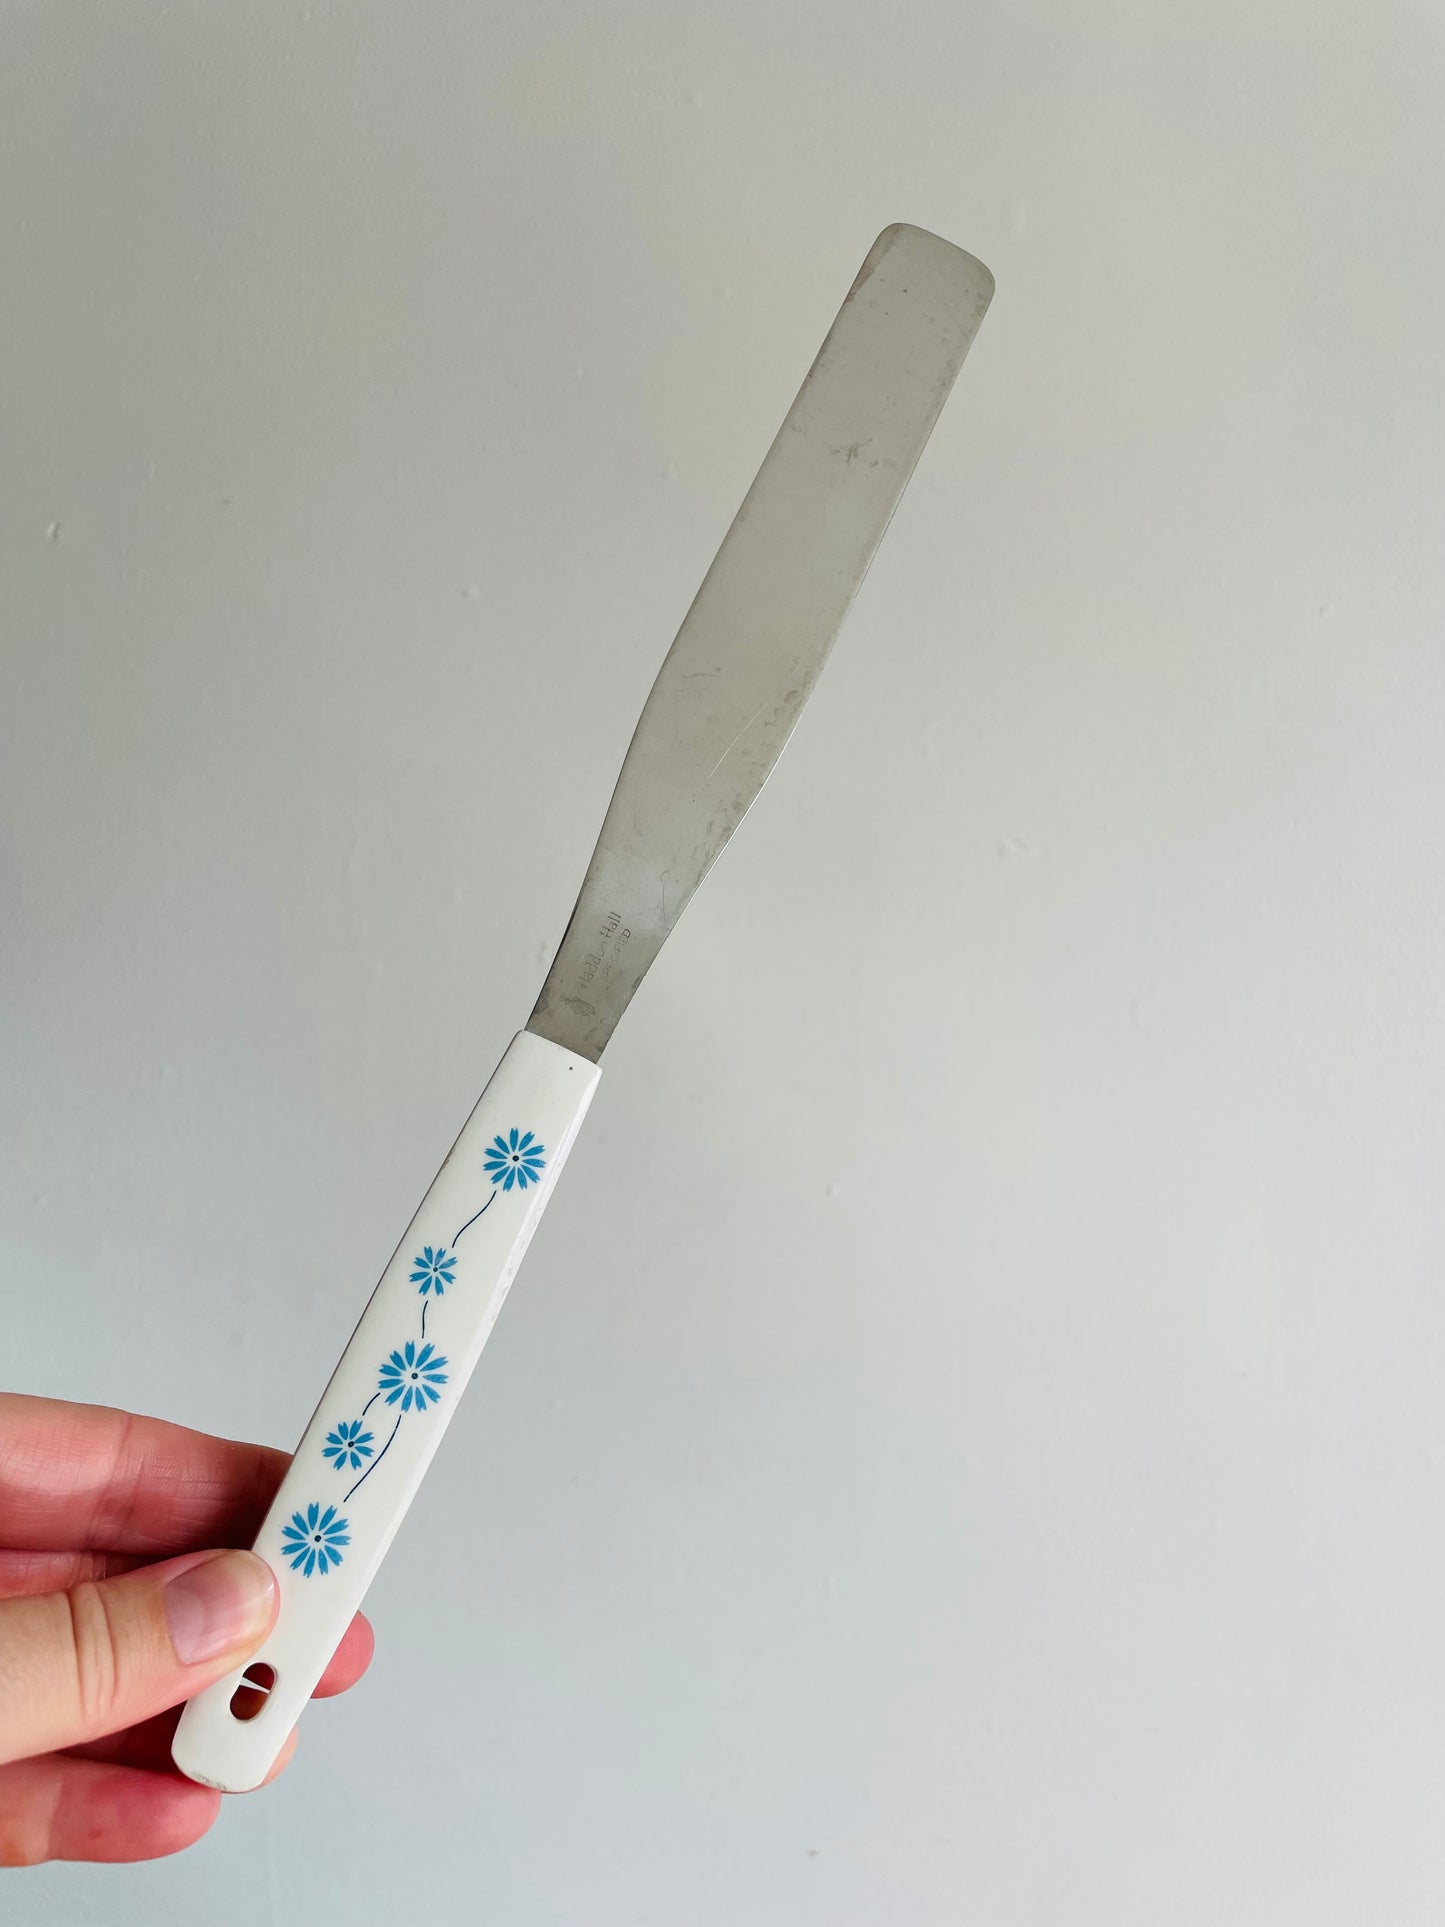 Haddon Hall Stainless Steel Japan Icing Spreader Spatula with Blue Flowers on Handle